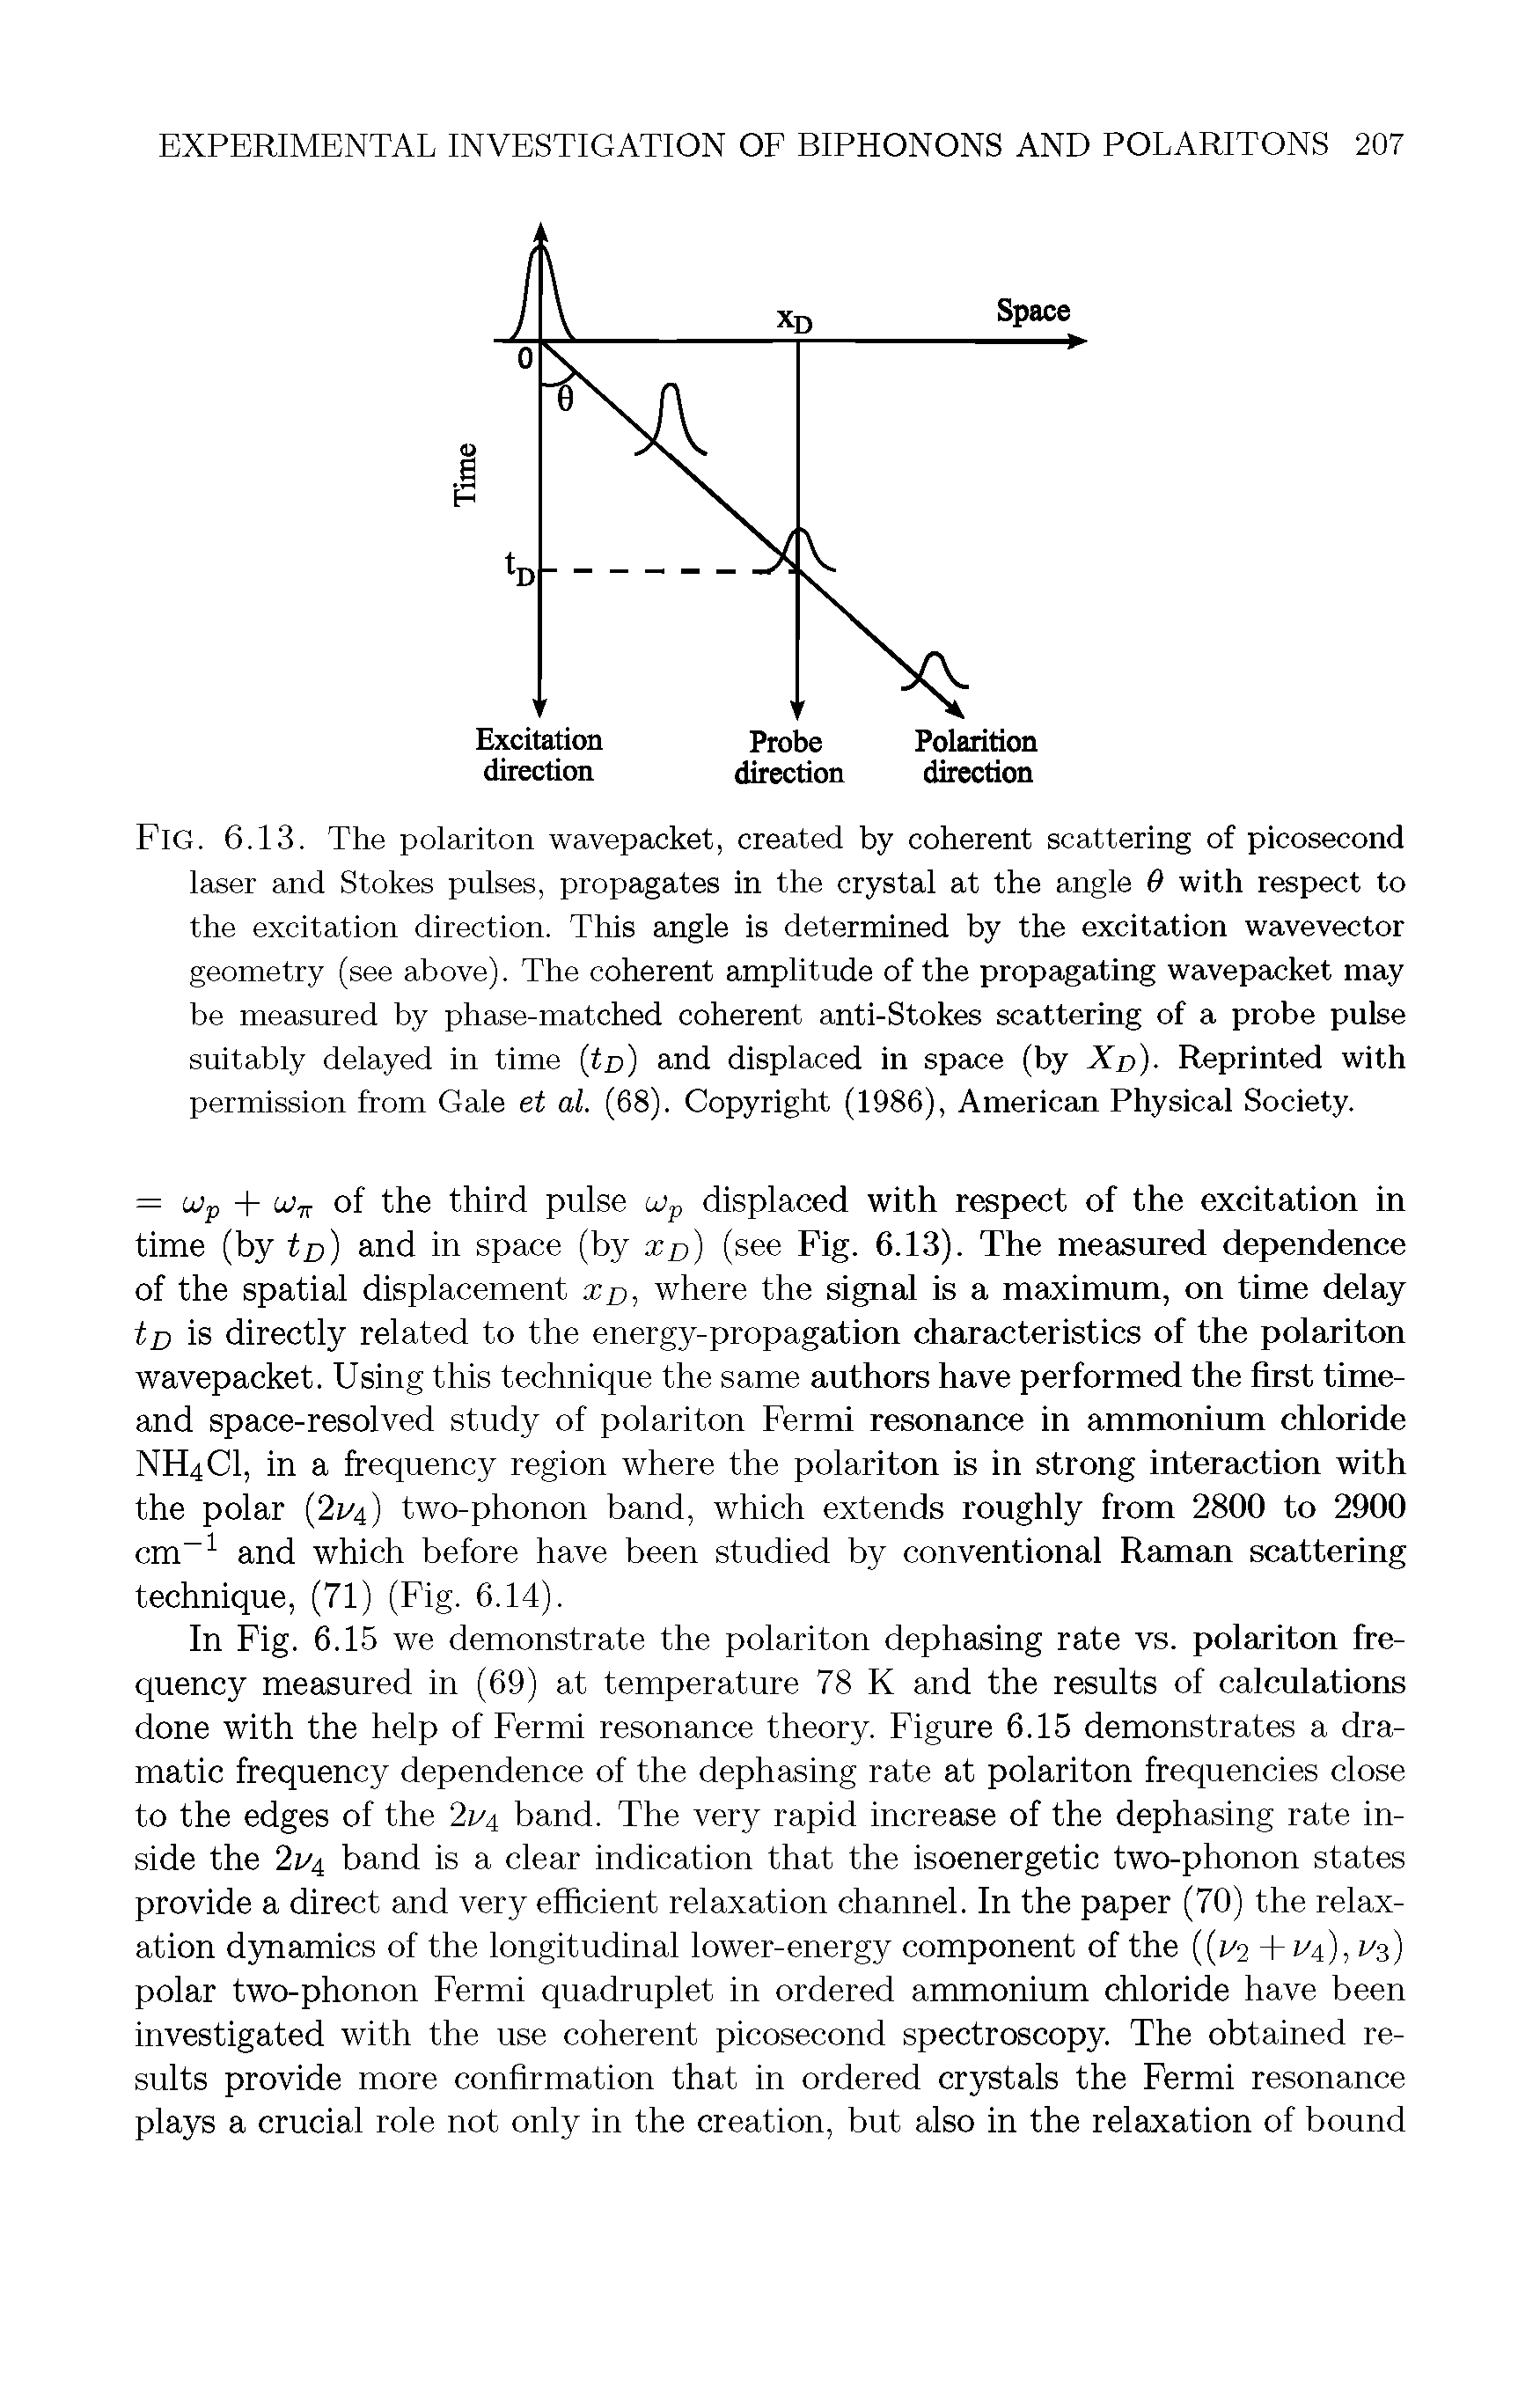 Fig. 6.13. The polariton wavepacket, created by coherent scattering of picosecond laser and Stokes pulses, propagates in the crystal at the angle 0 with respect to the excitation direction. This angle is determined by the excitation wavevector geometry (see above). The coherent amplitude of the propagating wavepacket may be measured by phase-matched coherent anti-Stokes scattering of a probe pulse suitably delayed in time (fn) and displaced in space (by Xn)- Reprinted with permission from Gale et al. (68). Copyright (1986), American Physical Society.